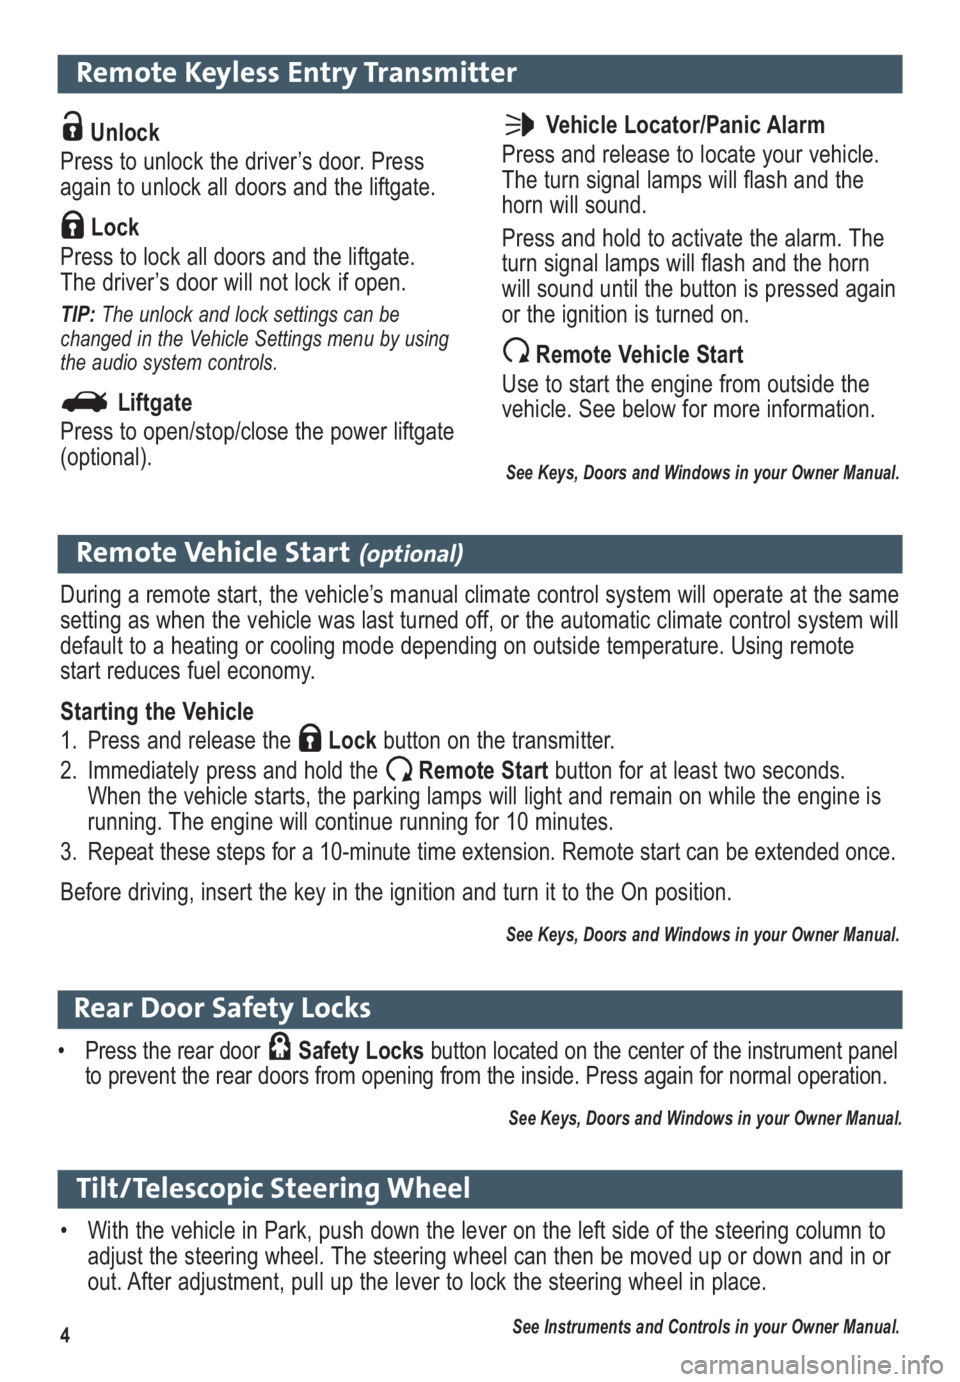 GMC TERRAIN 2012  Get To Know Guide 4
Remote Keyless Entry Transmitter
Unlock 
Press to unlock the driver’s door. Press
again to unlock all doors and the liftgate. 
Lock 
Press to lock all doors and the liftgate.
The driver’s door w